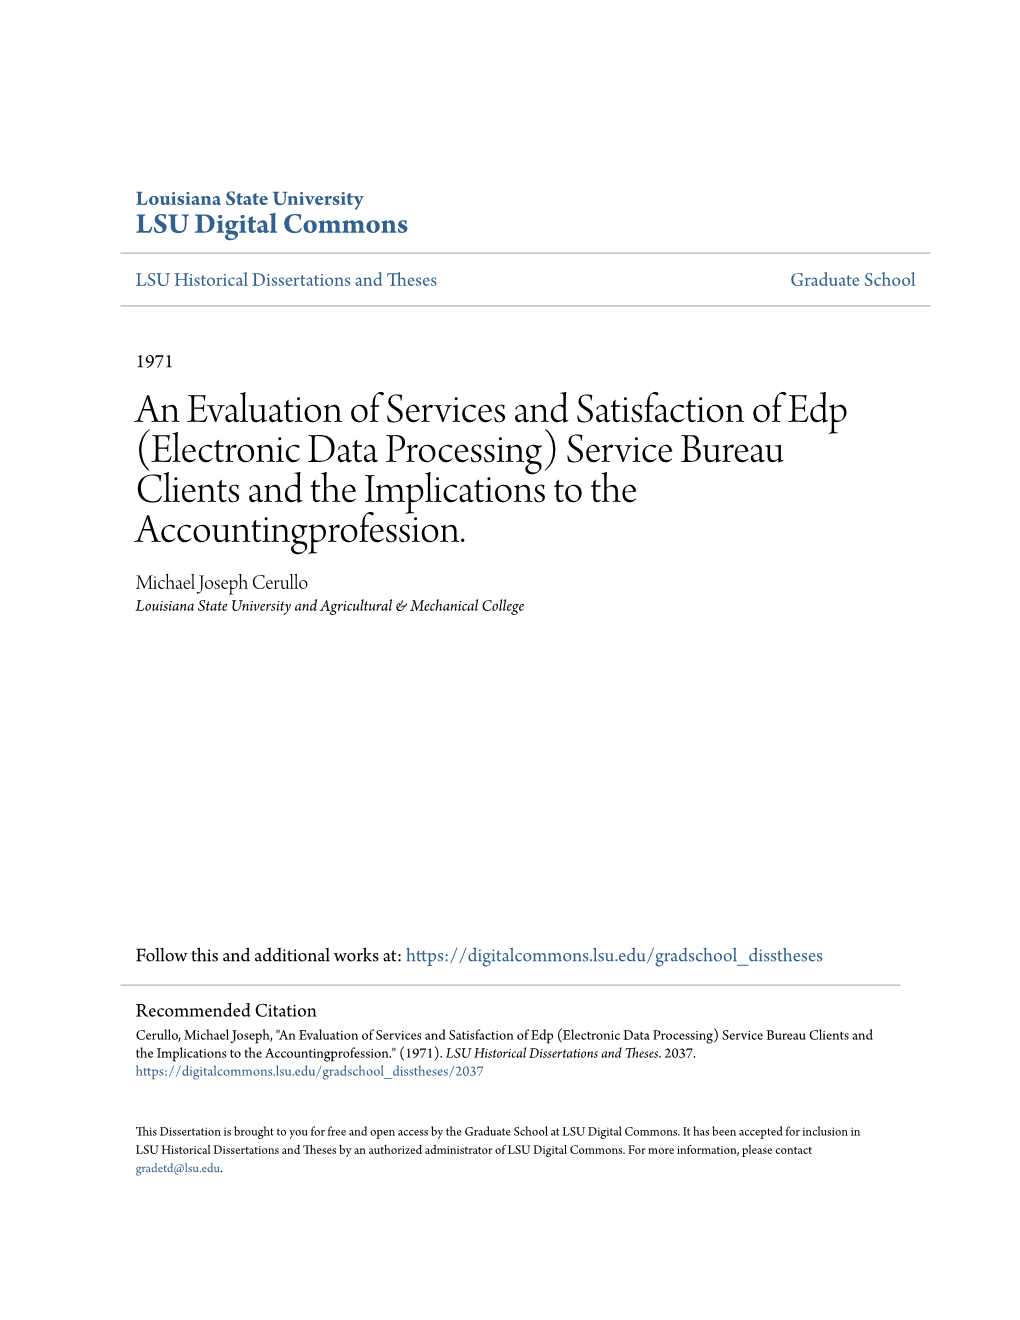 Electronic Data Processing) Service Bureau Clients and the Implications to the Accountingprofession